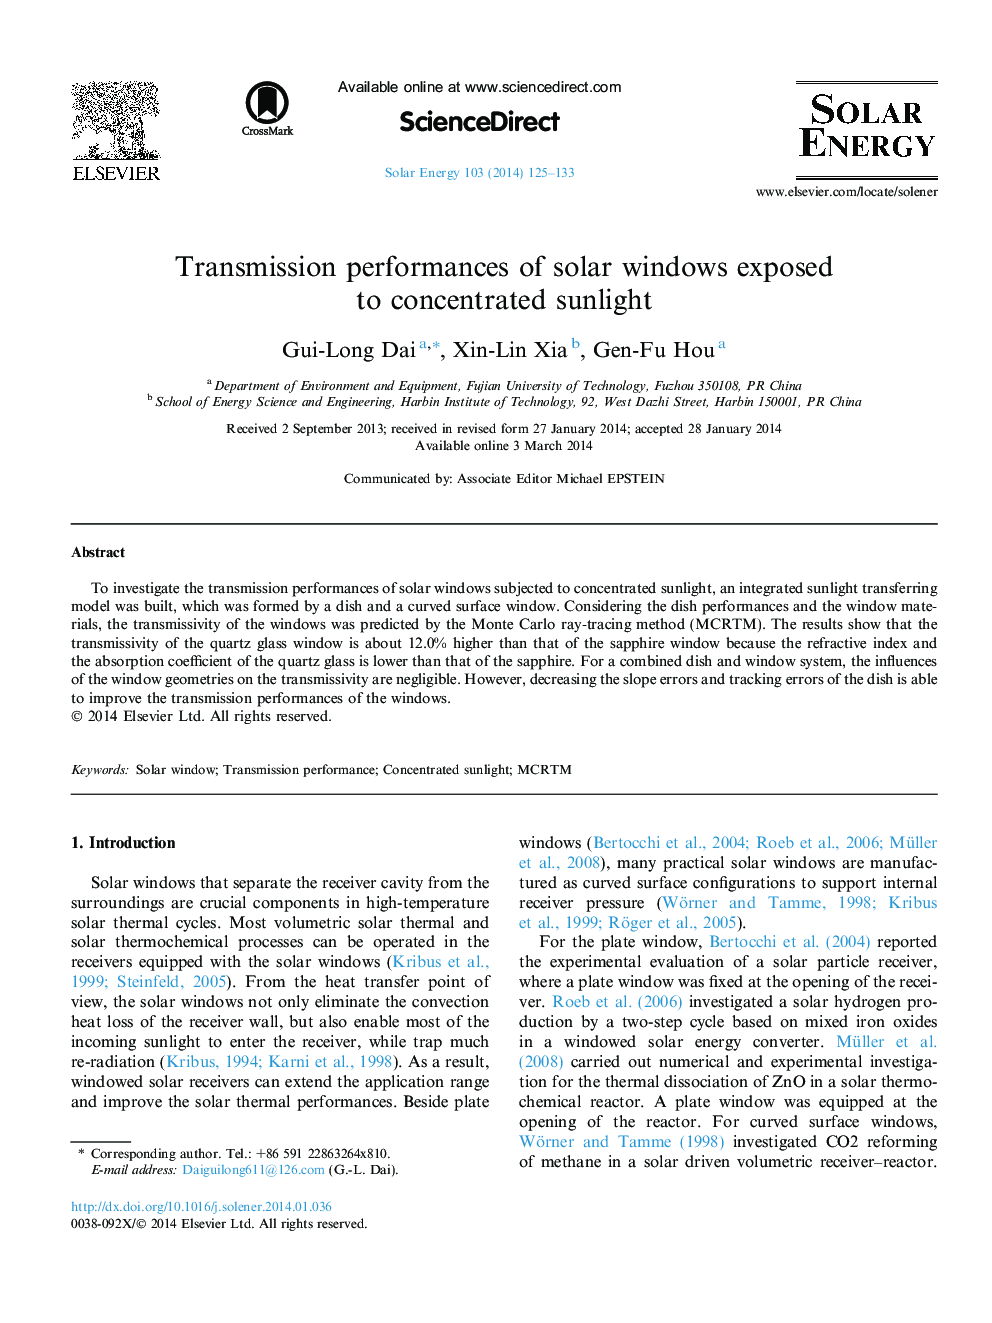 Transmission performances of solar windows exposed to concentrated sunlight